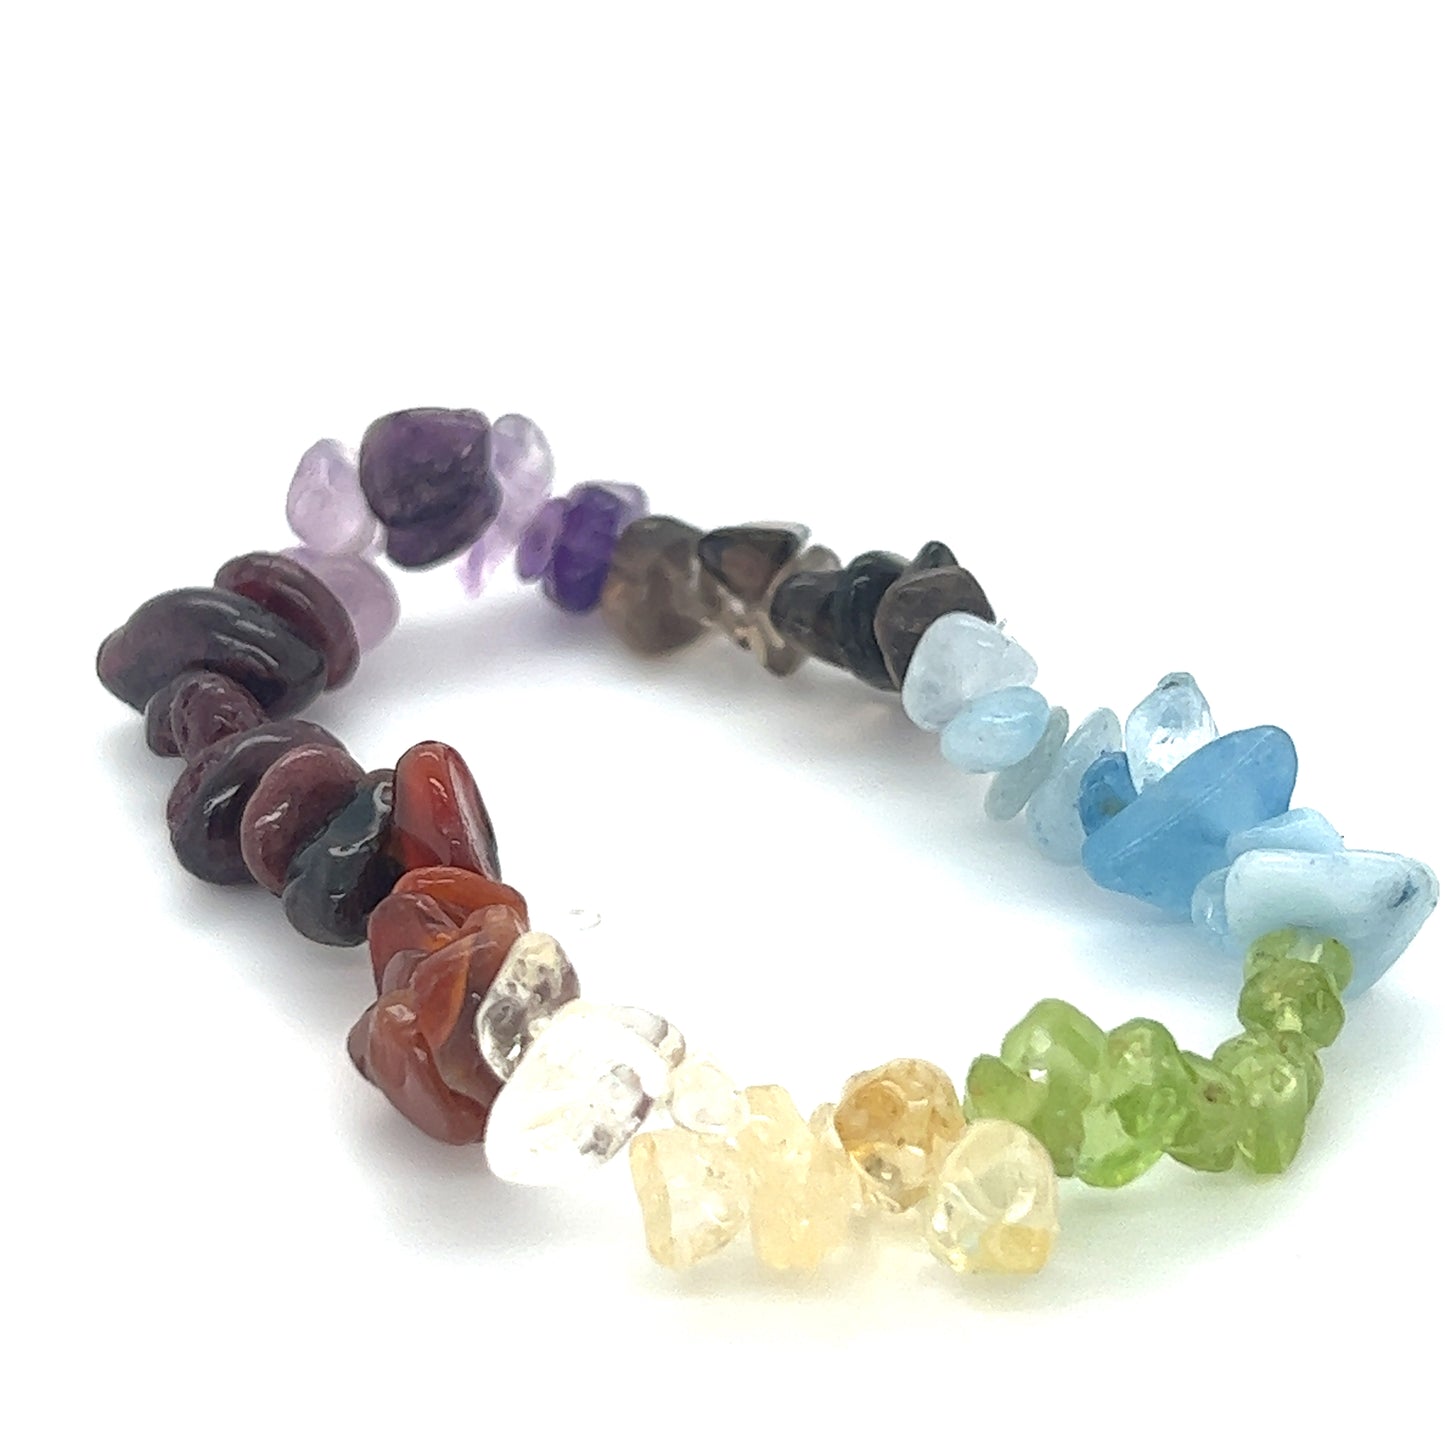 A Chakra Stone Chip Bracelet adorned with different colored stones, radiating healing energy and promoting harmony, made by Super Silver.